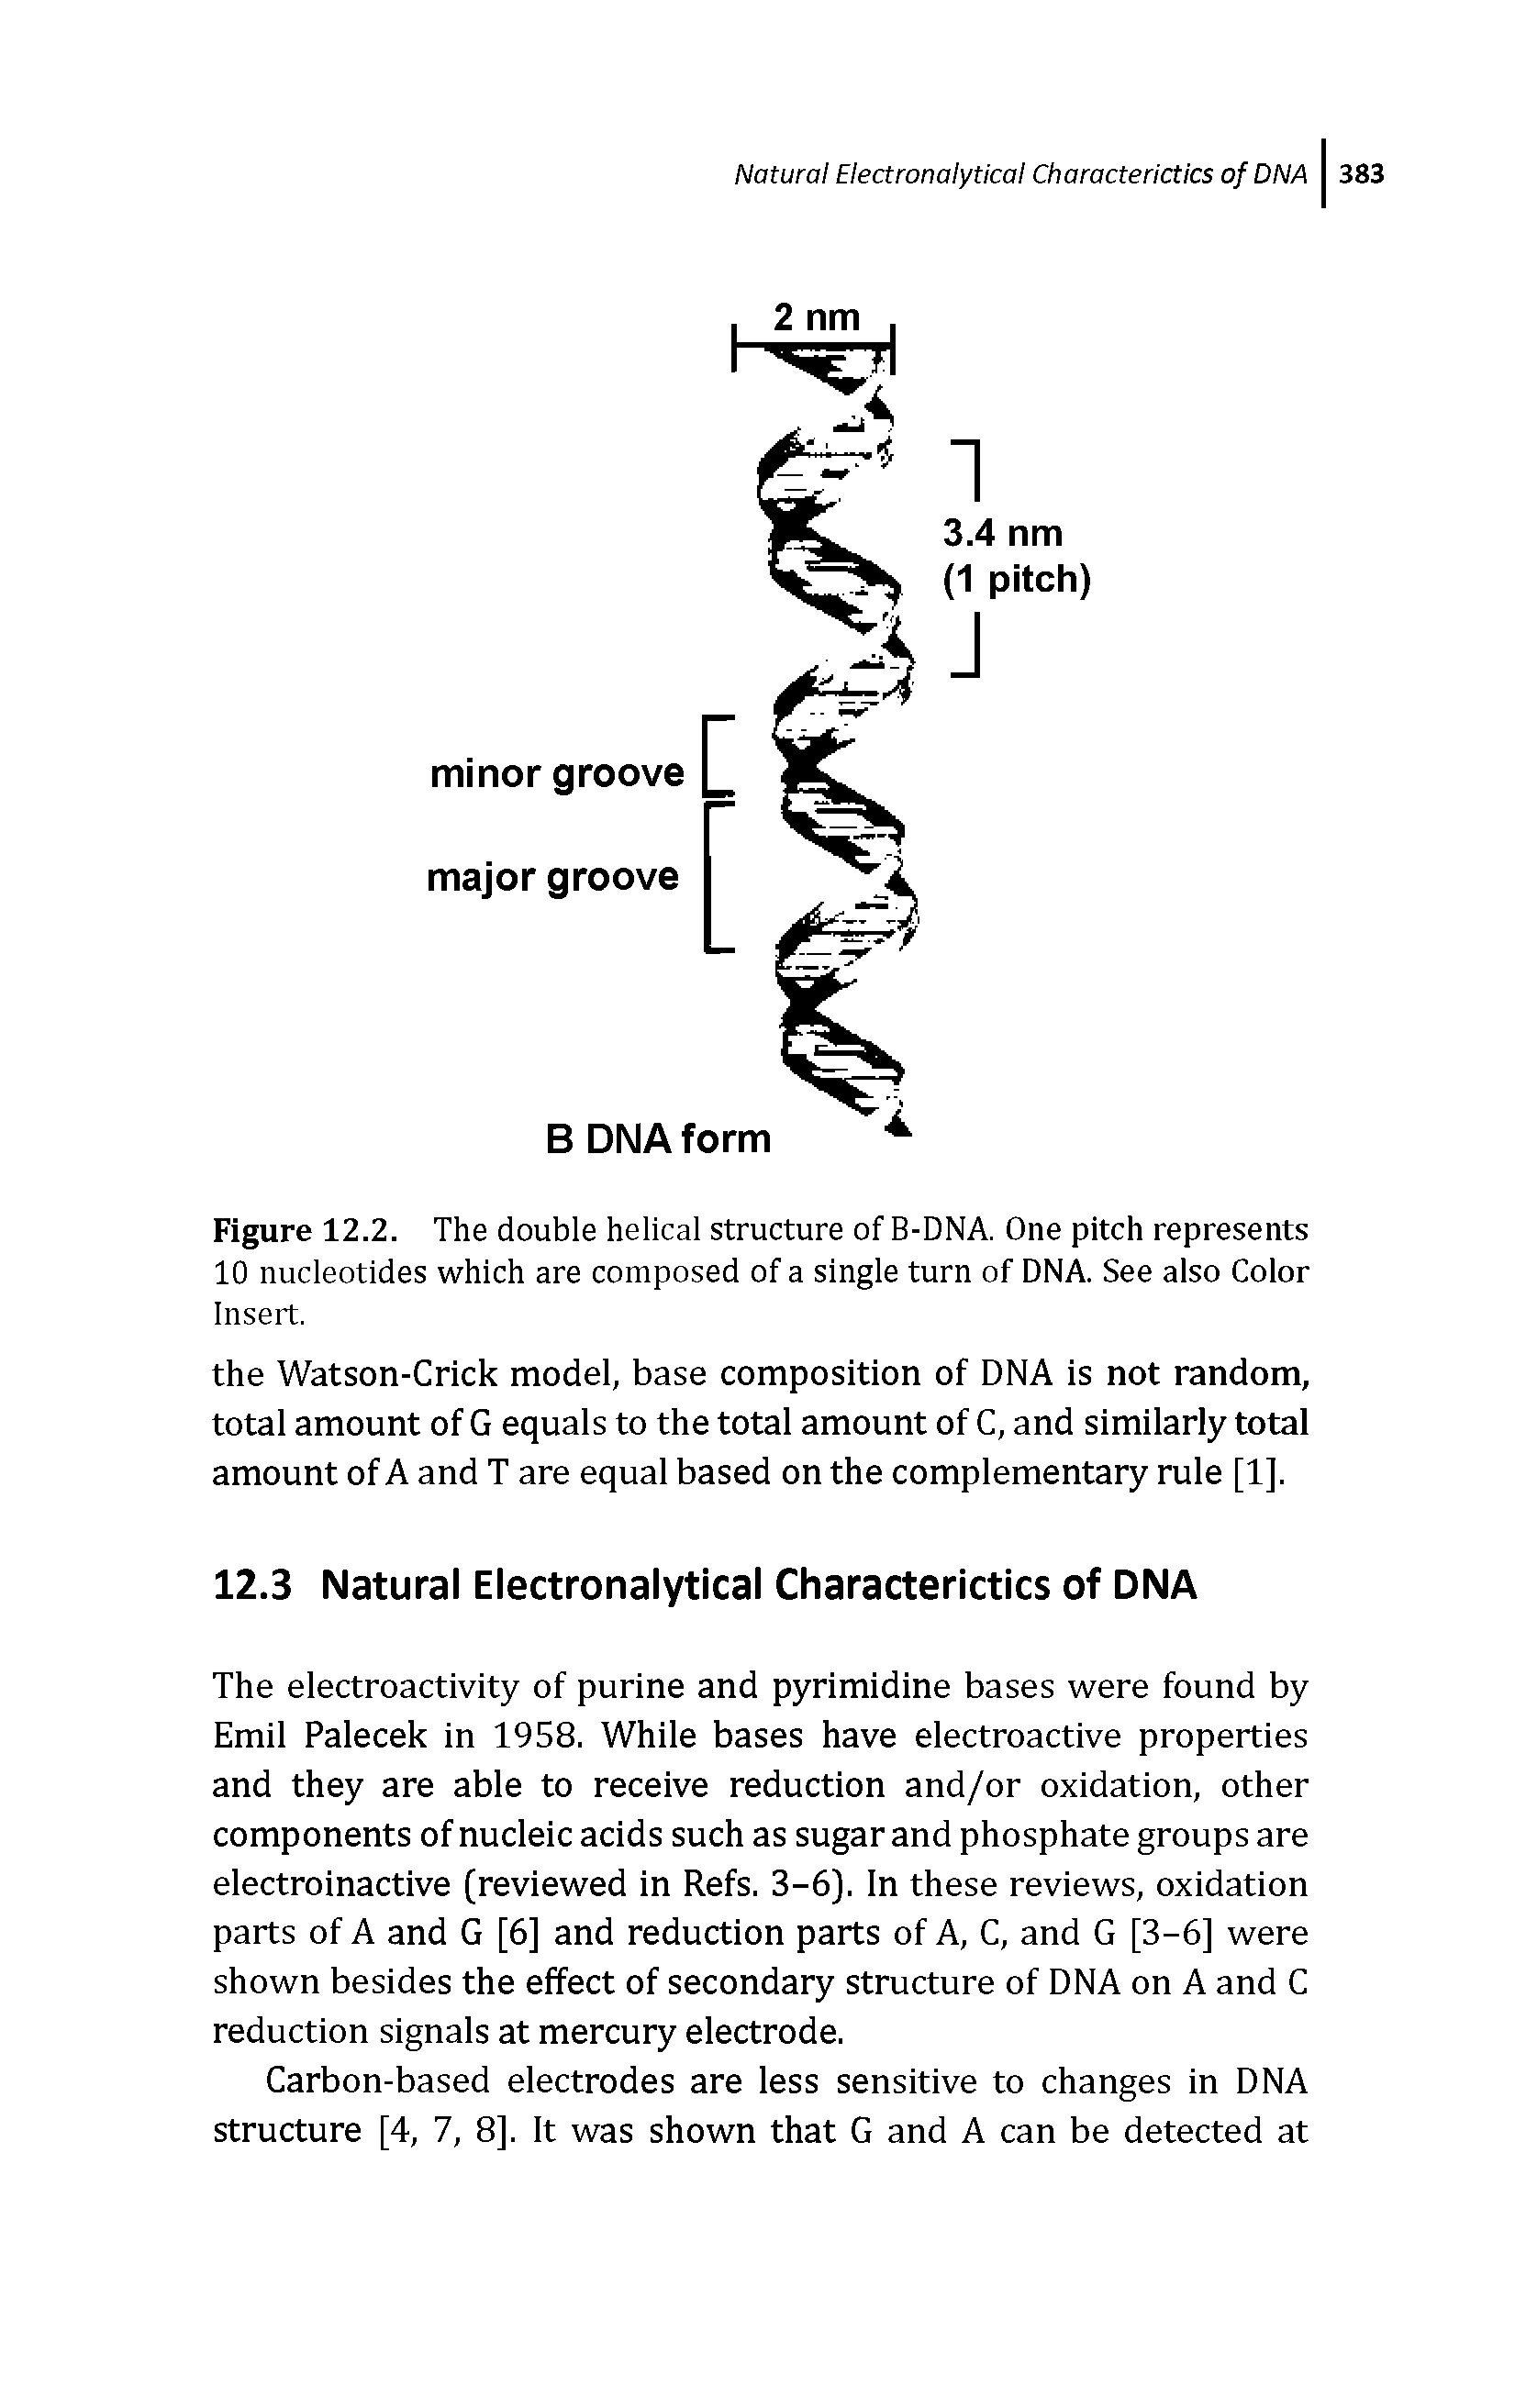 Figure 12.2. The double helical structure of B-DNA. One pitch represents 10 nucleotides which are composed of a single turn of DNA. See also Color Insert.